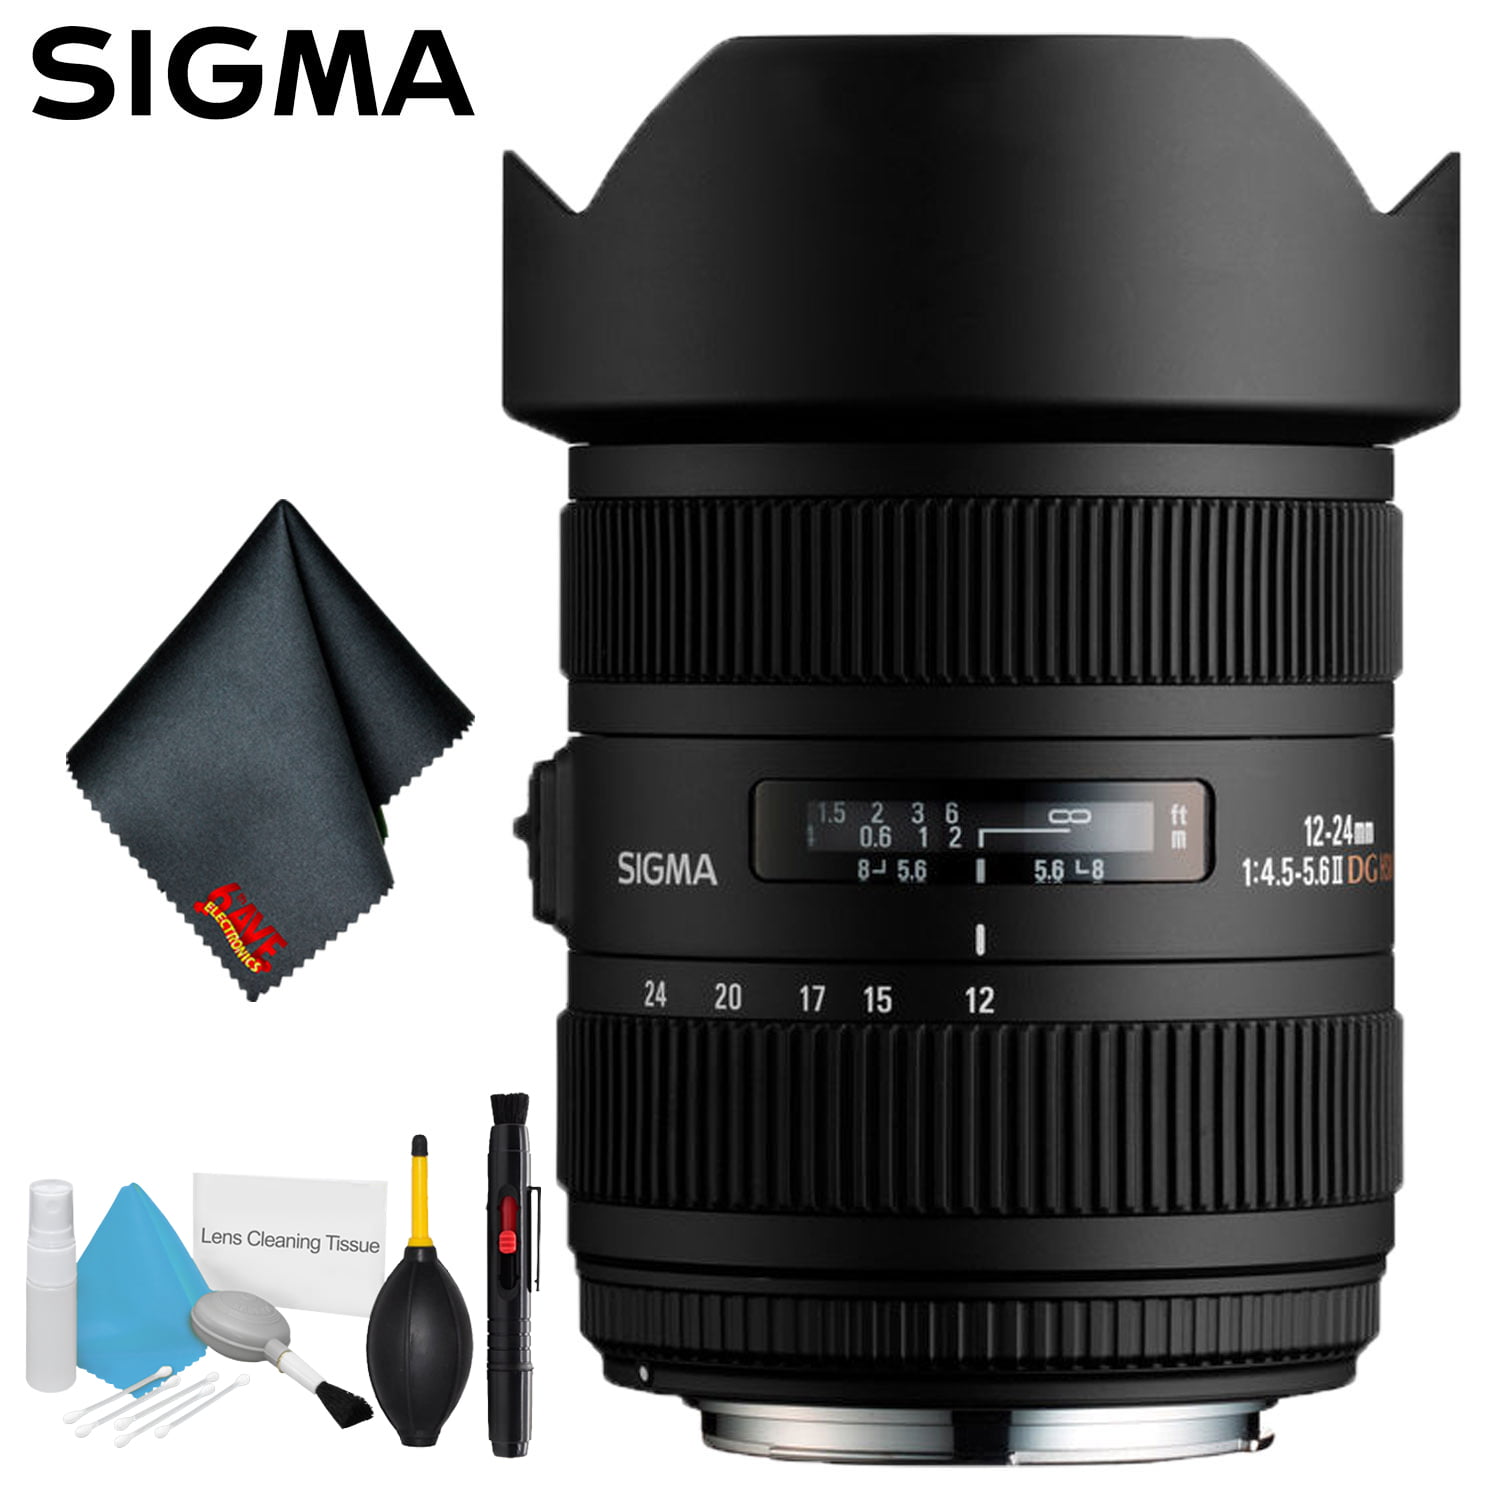 Sigma 12-24mm f/4.5-5.6 DG HSM II Lens (For Canon) Deluxe Kit